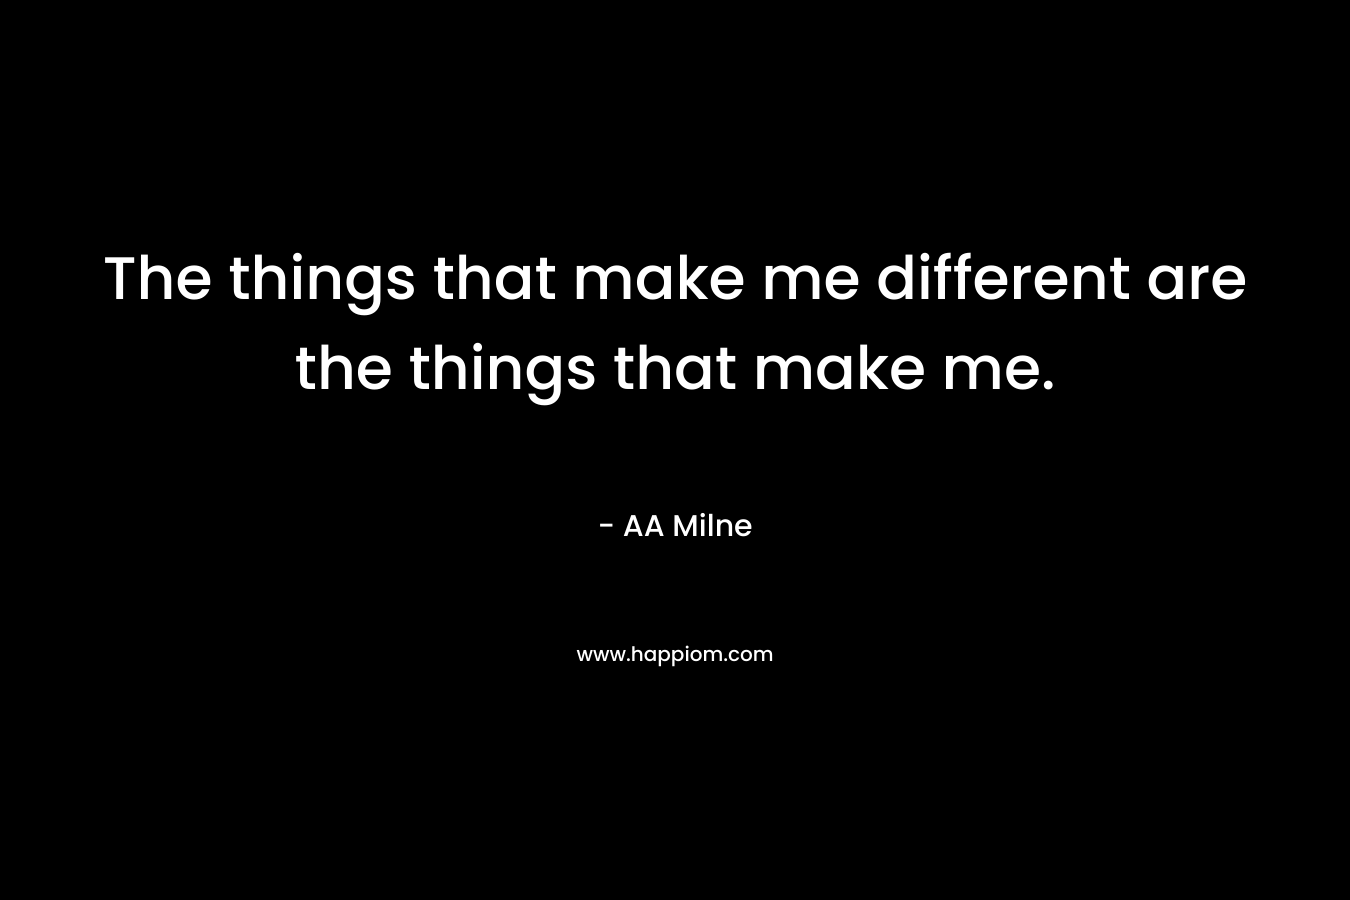 The things that make me different are the things that make me.